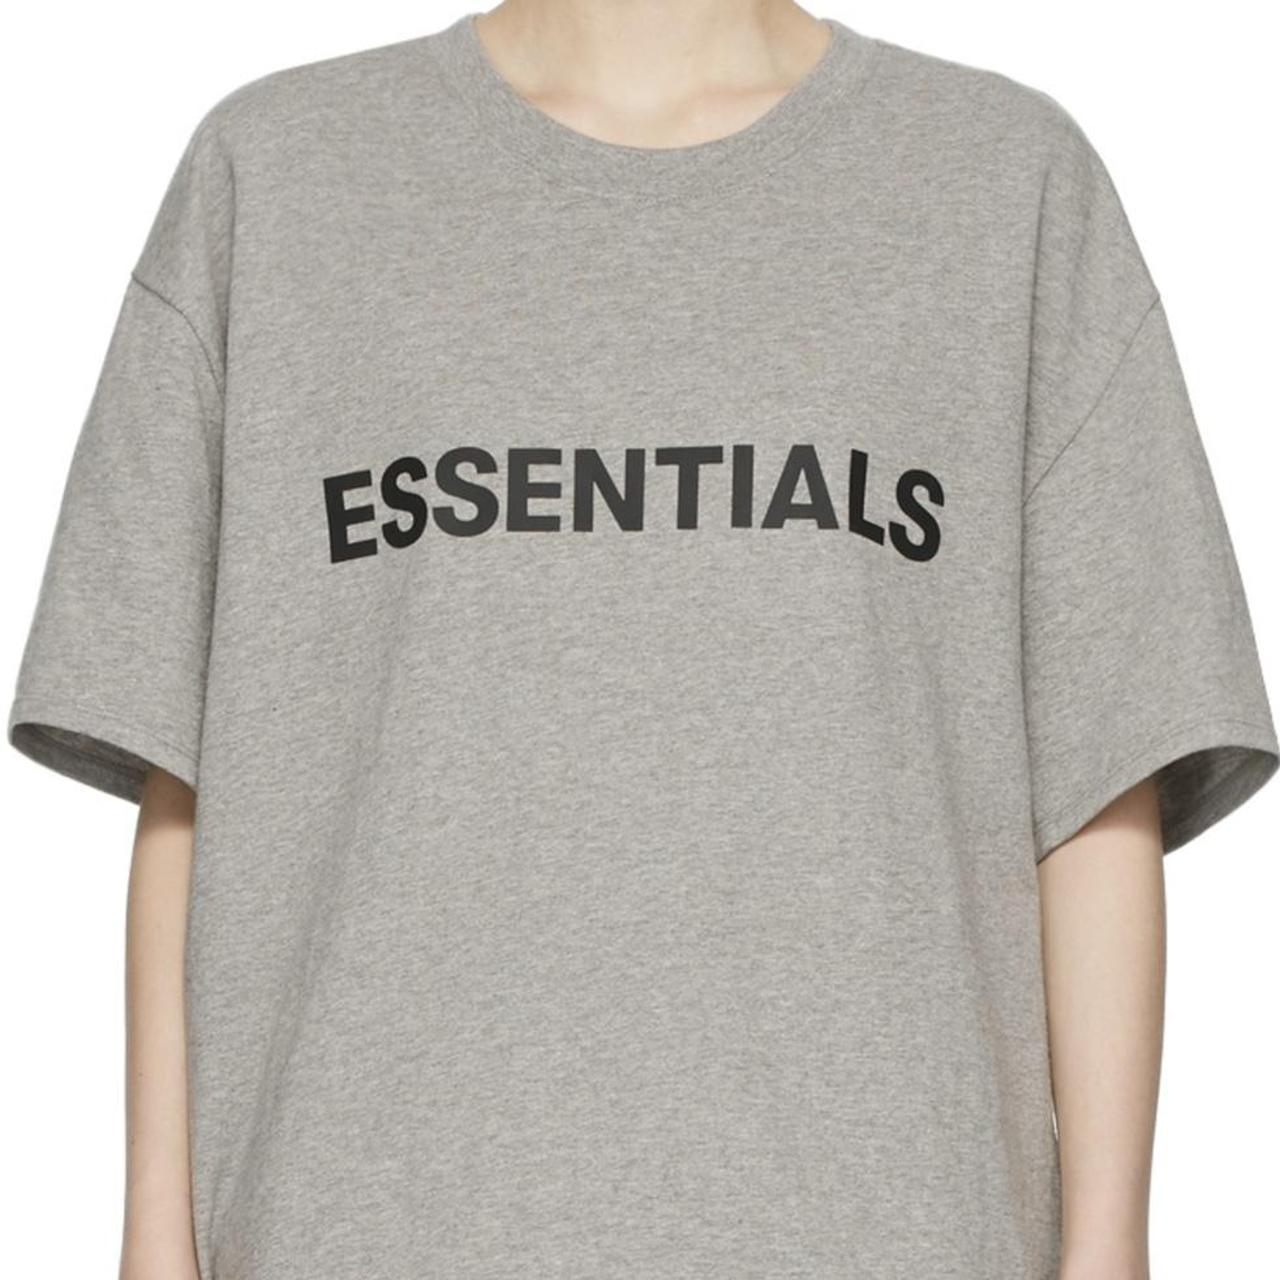 Product Image 1 - FEAR OF GOD ESSENTIALS T-SHIRT